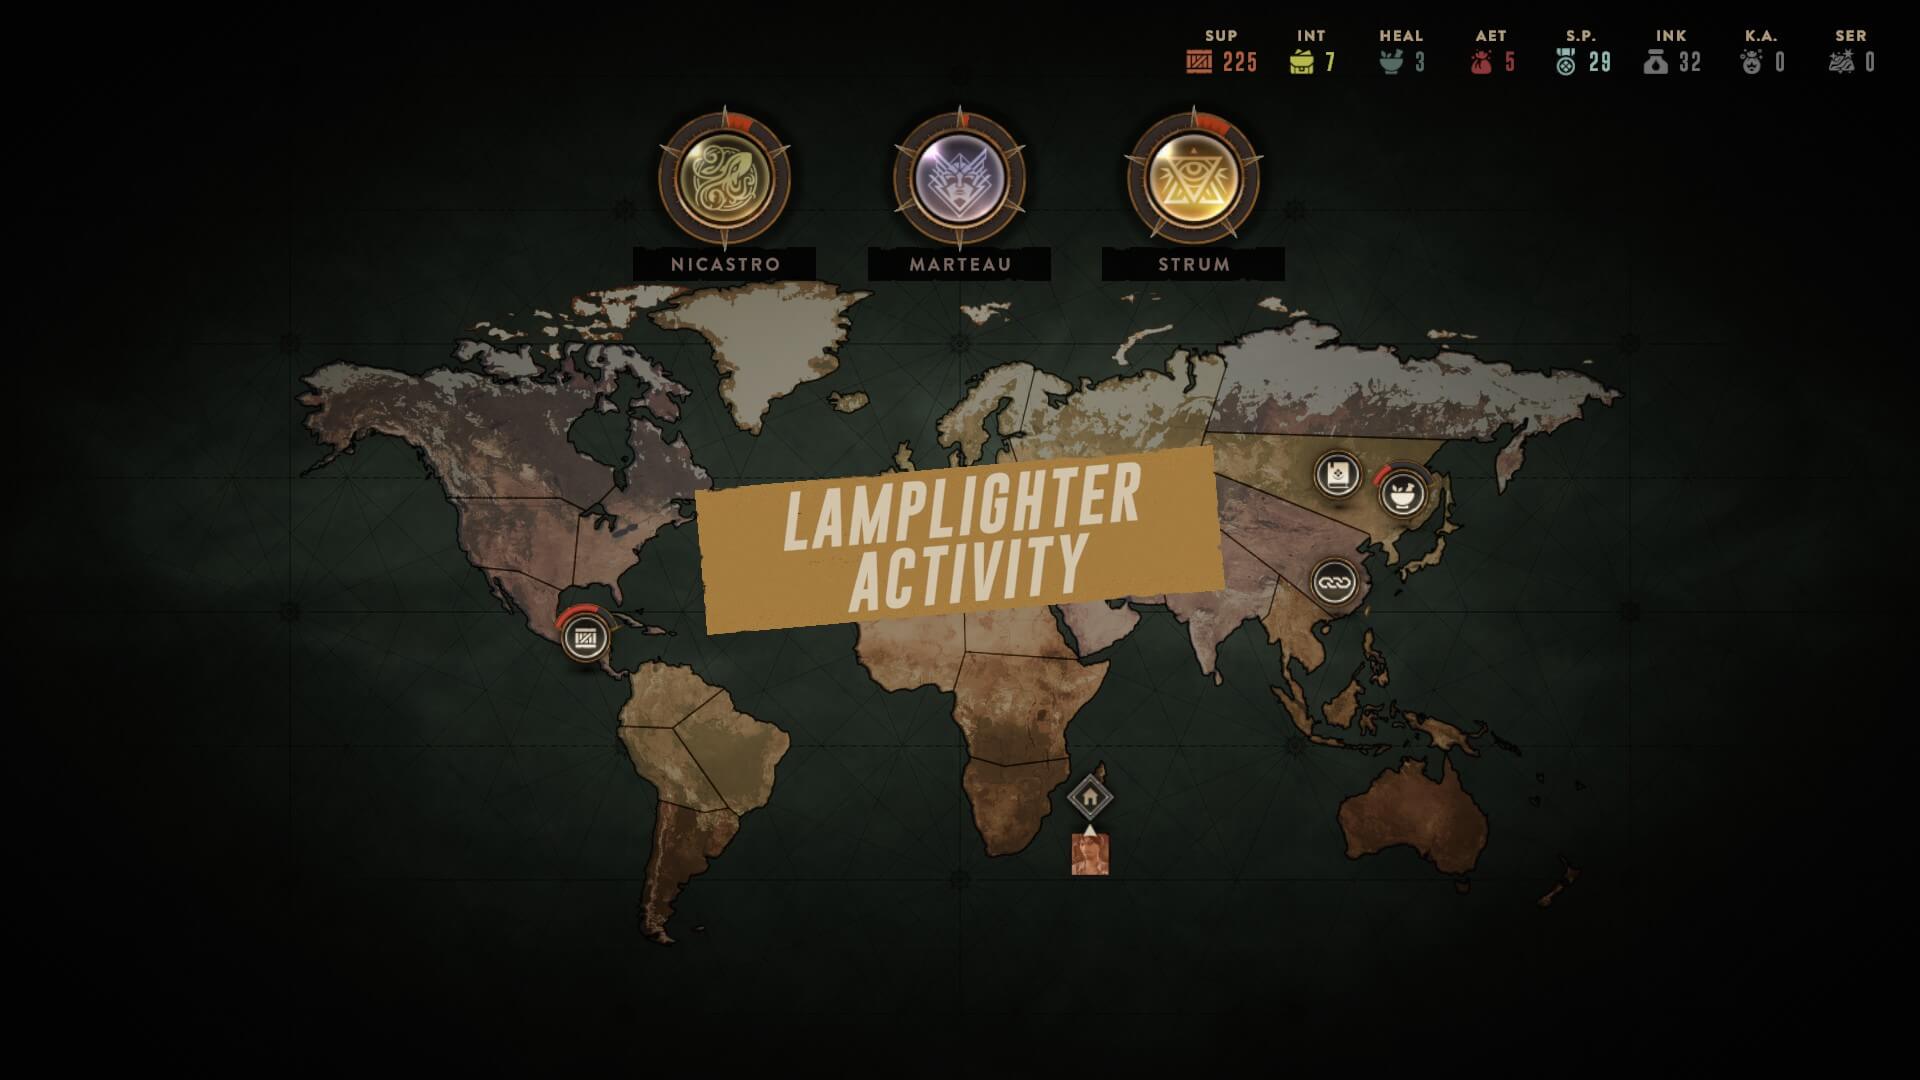 The world map with various icons shown for different missions. the top three symbols represent the enemy factions and influence.